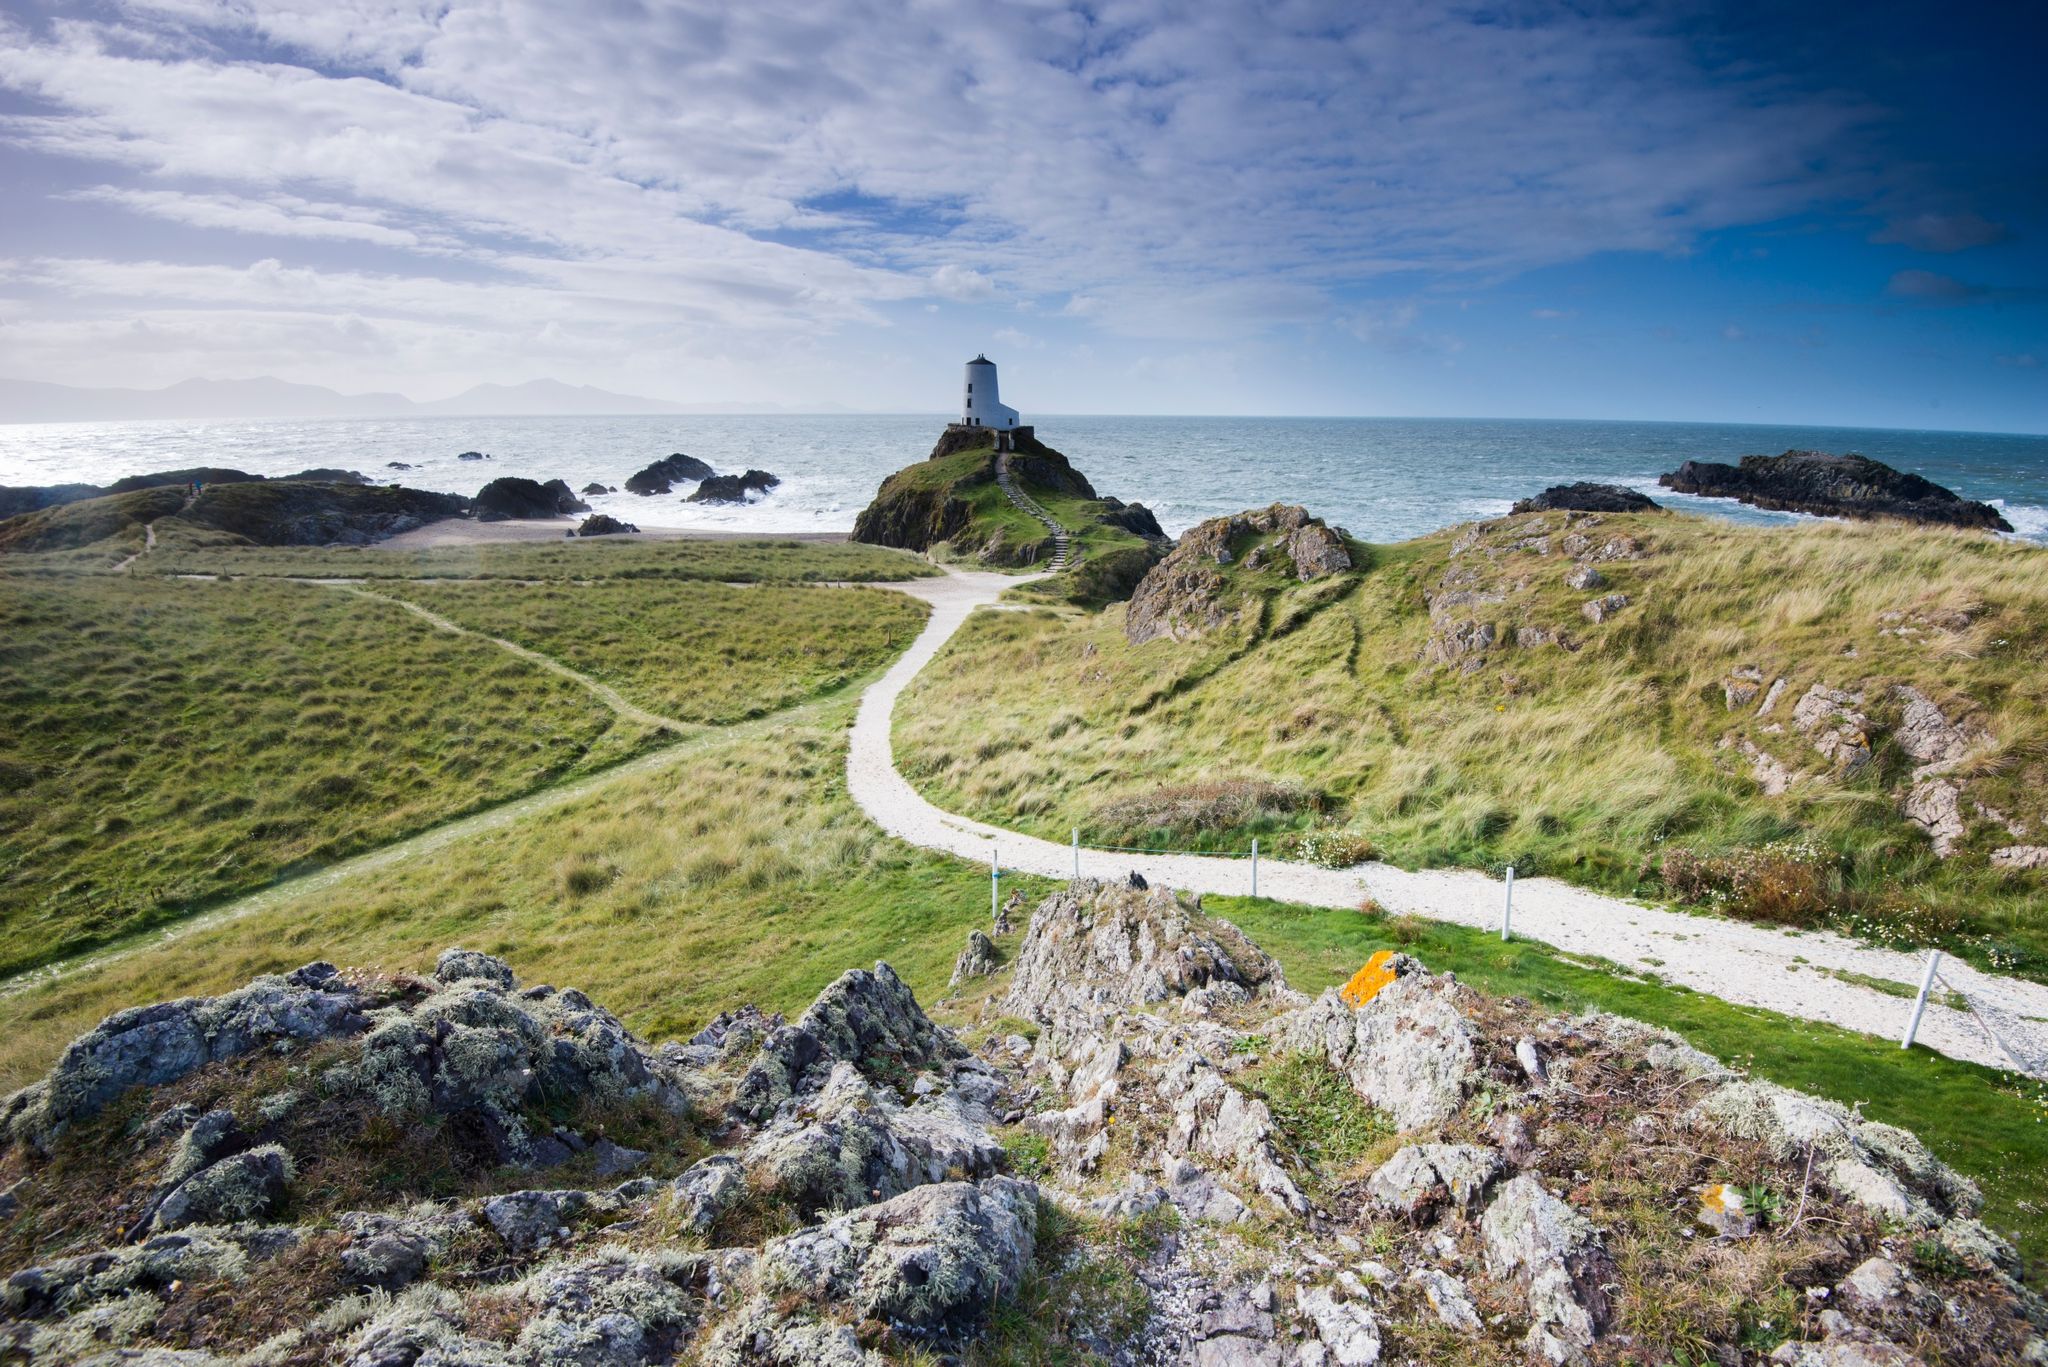 Llanddwyn Island Lighthouse on Anglesey, which contains some of the most spectacular coastline in North Wales | ELLE UK